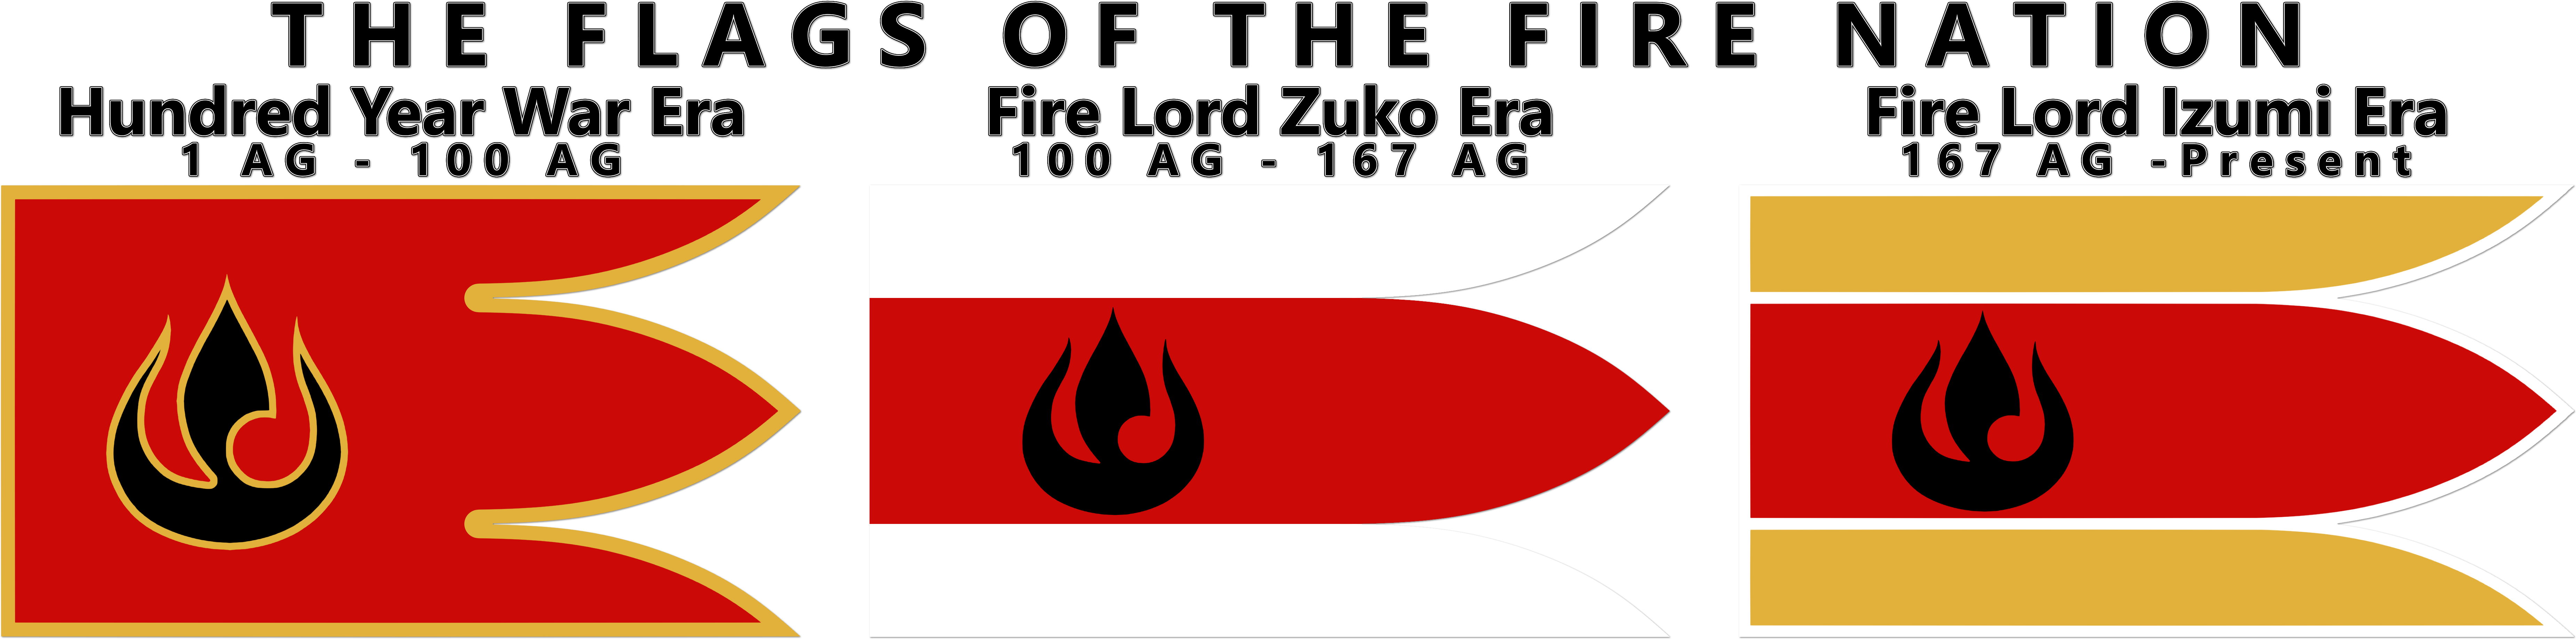 Avatar Flags Of The Fire Nation By Mobiyuz On Deviantart